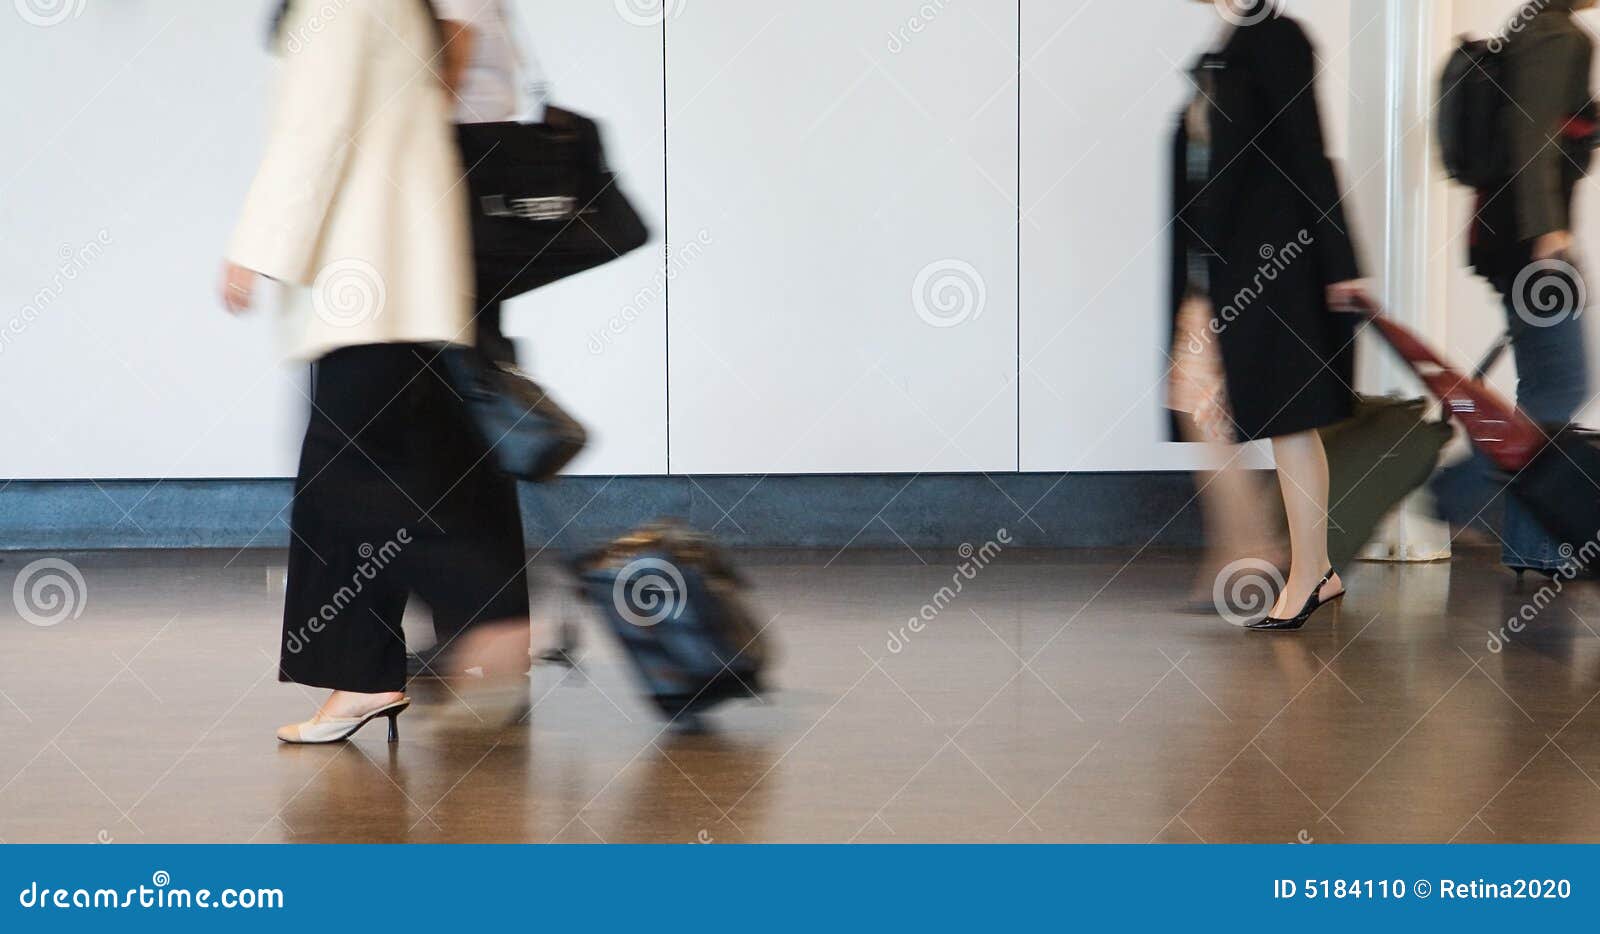 airport passengers rushing to connection